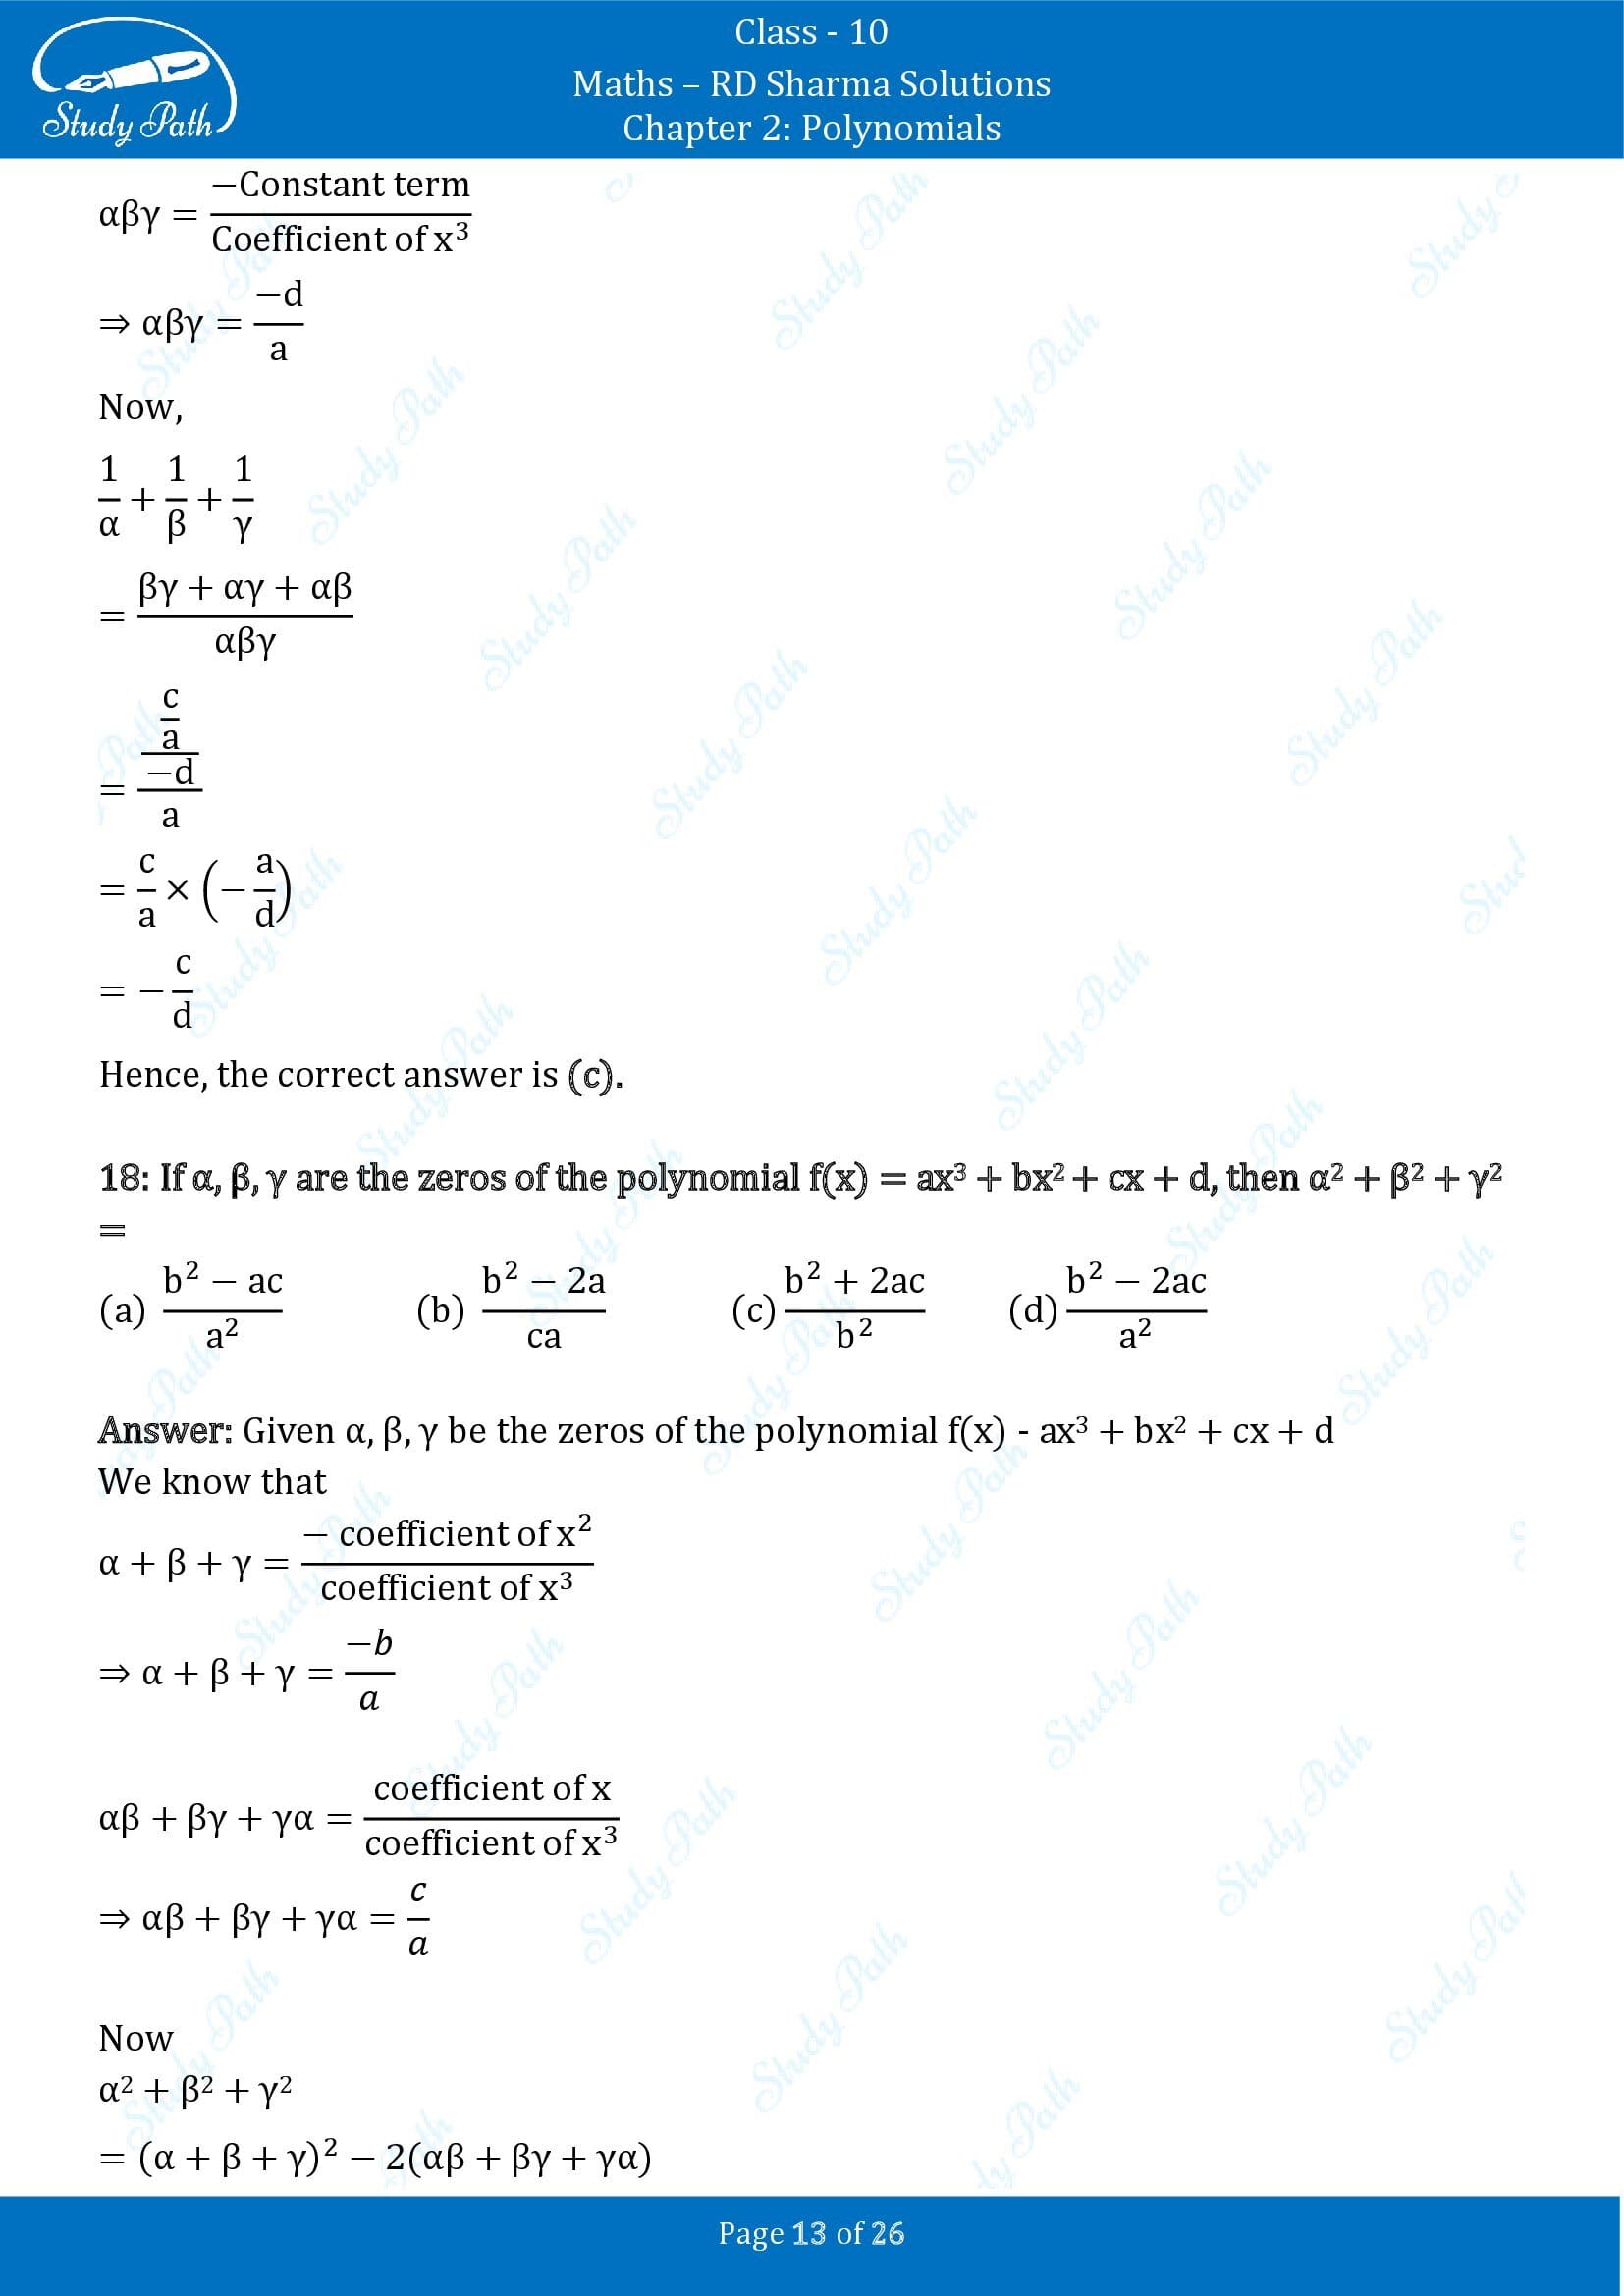 RD Sharma Solutions Class 10 Chapter 2 Polynomials Multiple Choice Questions MCQs 00013